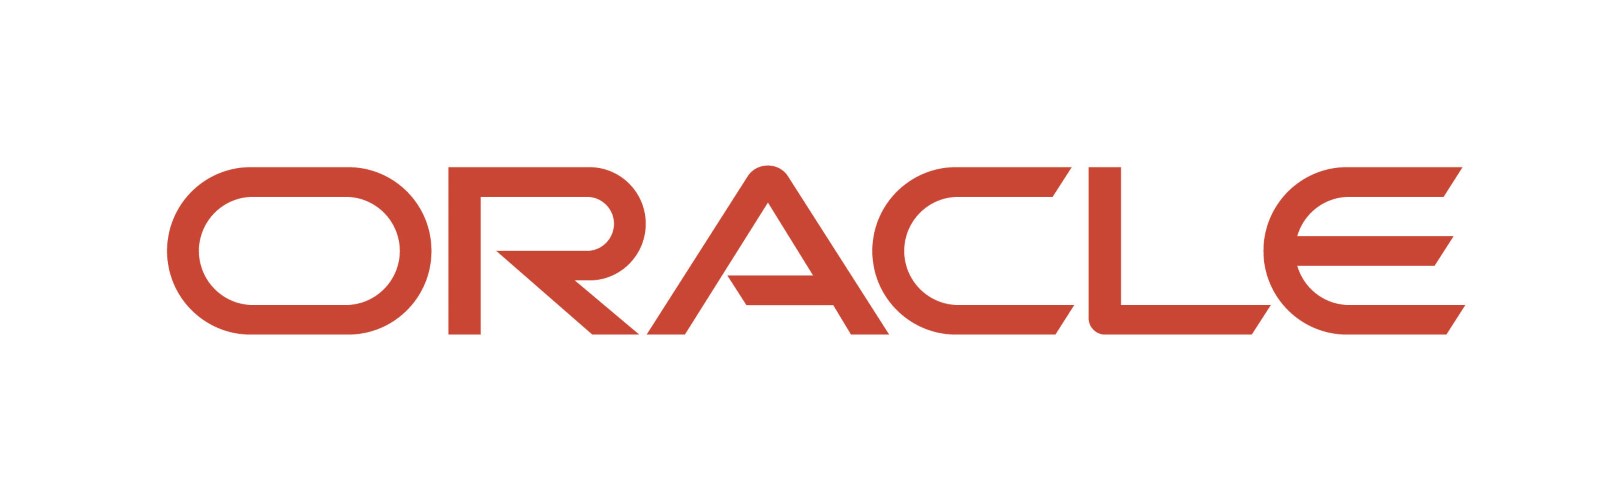 Oracle Cloud Infrastructure Announces OCI Compute Instances Based on New 4th Generation AMD EPYC Processors